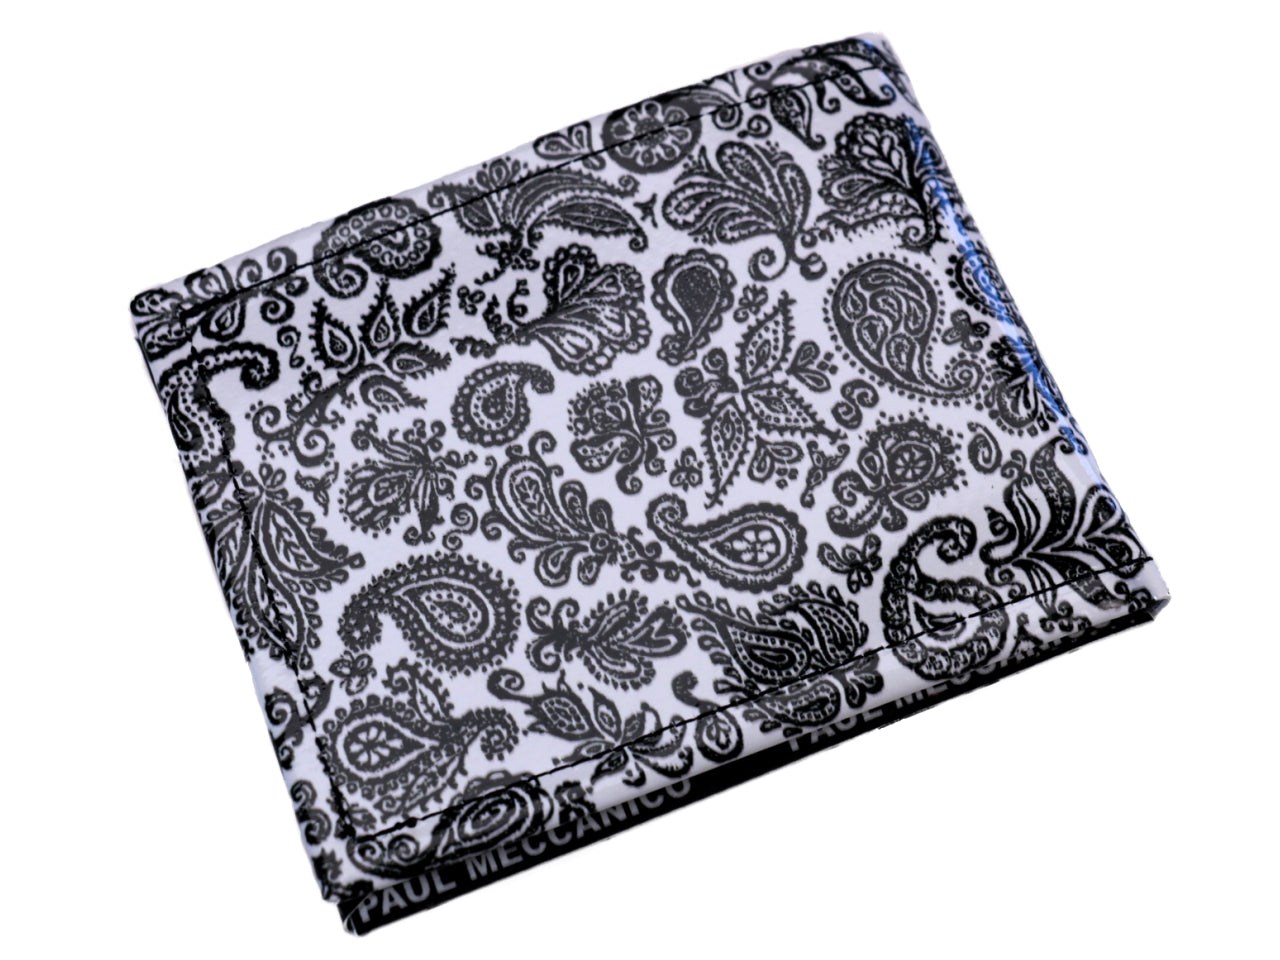 MEN'S WALLET BLACK AND WHITE WITH PAISLEY FANTASY. MODEL CRIK MADE OF LORRY TARPAULIN. - Limited Edition Paul Meccanico